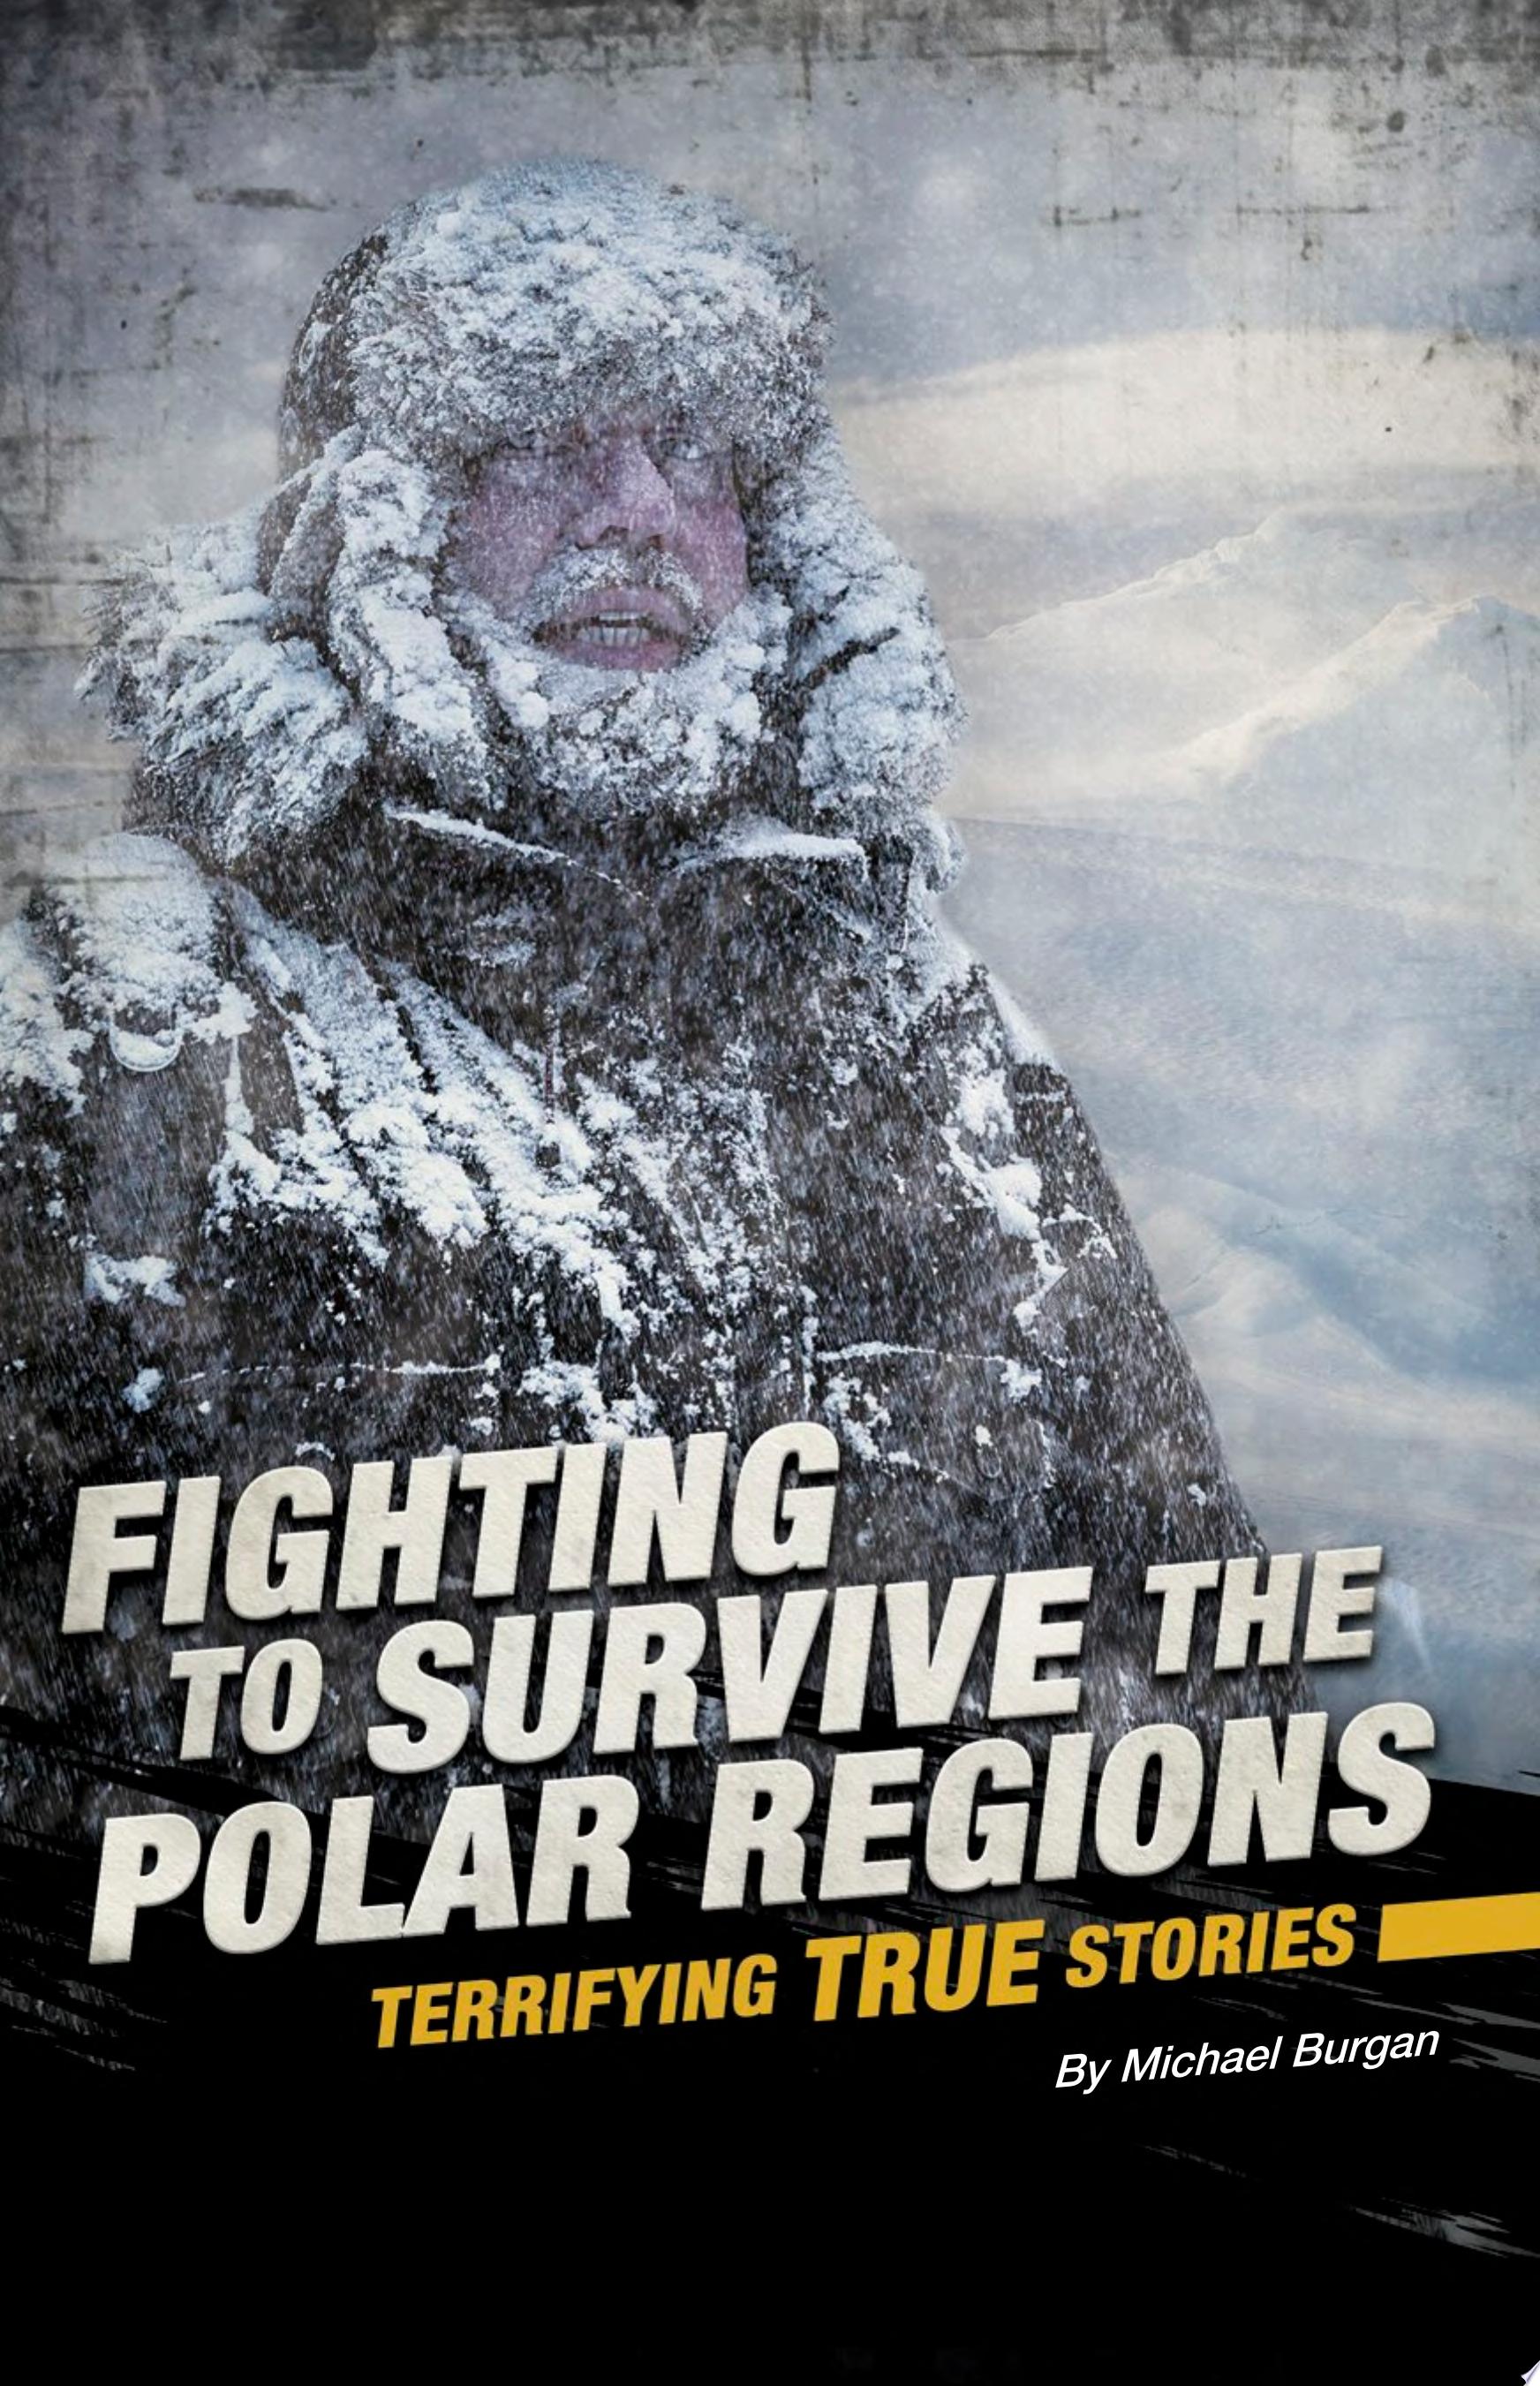 Image for "Fighting to Survive the Polar Regions"